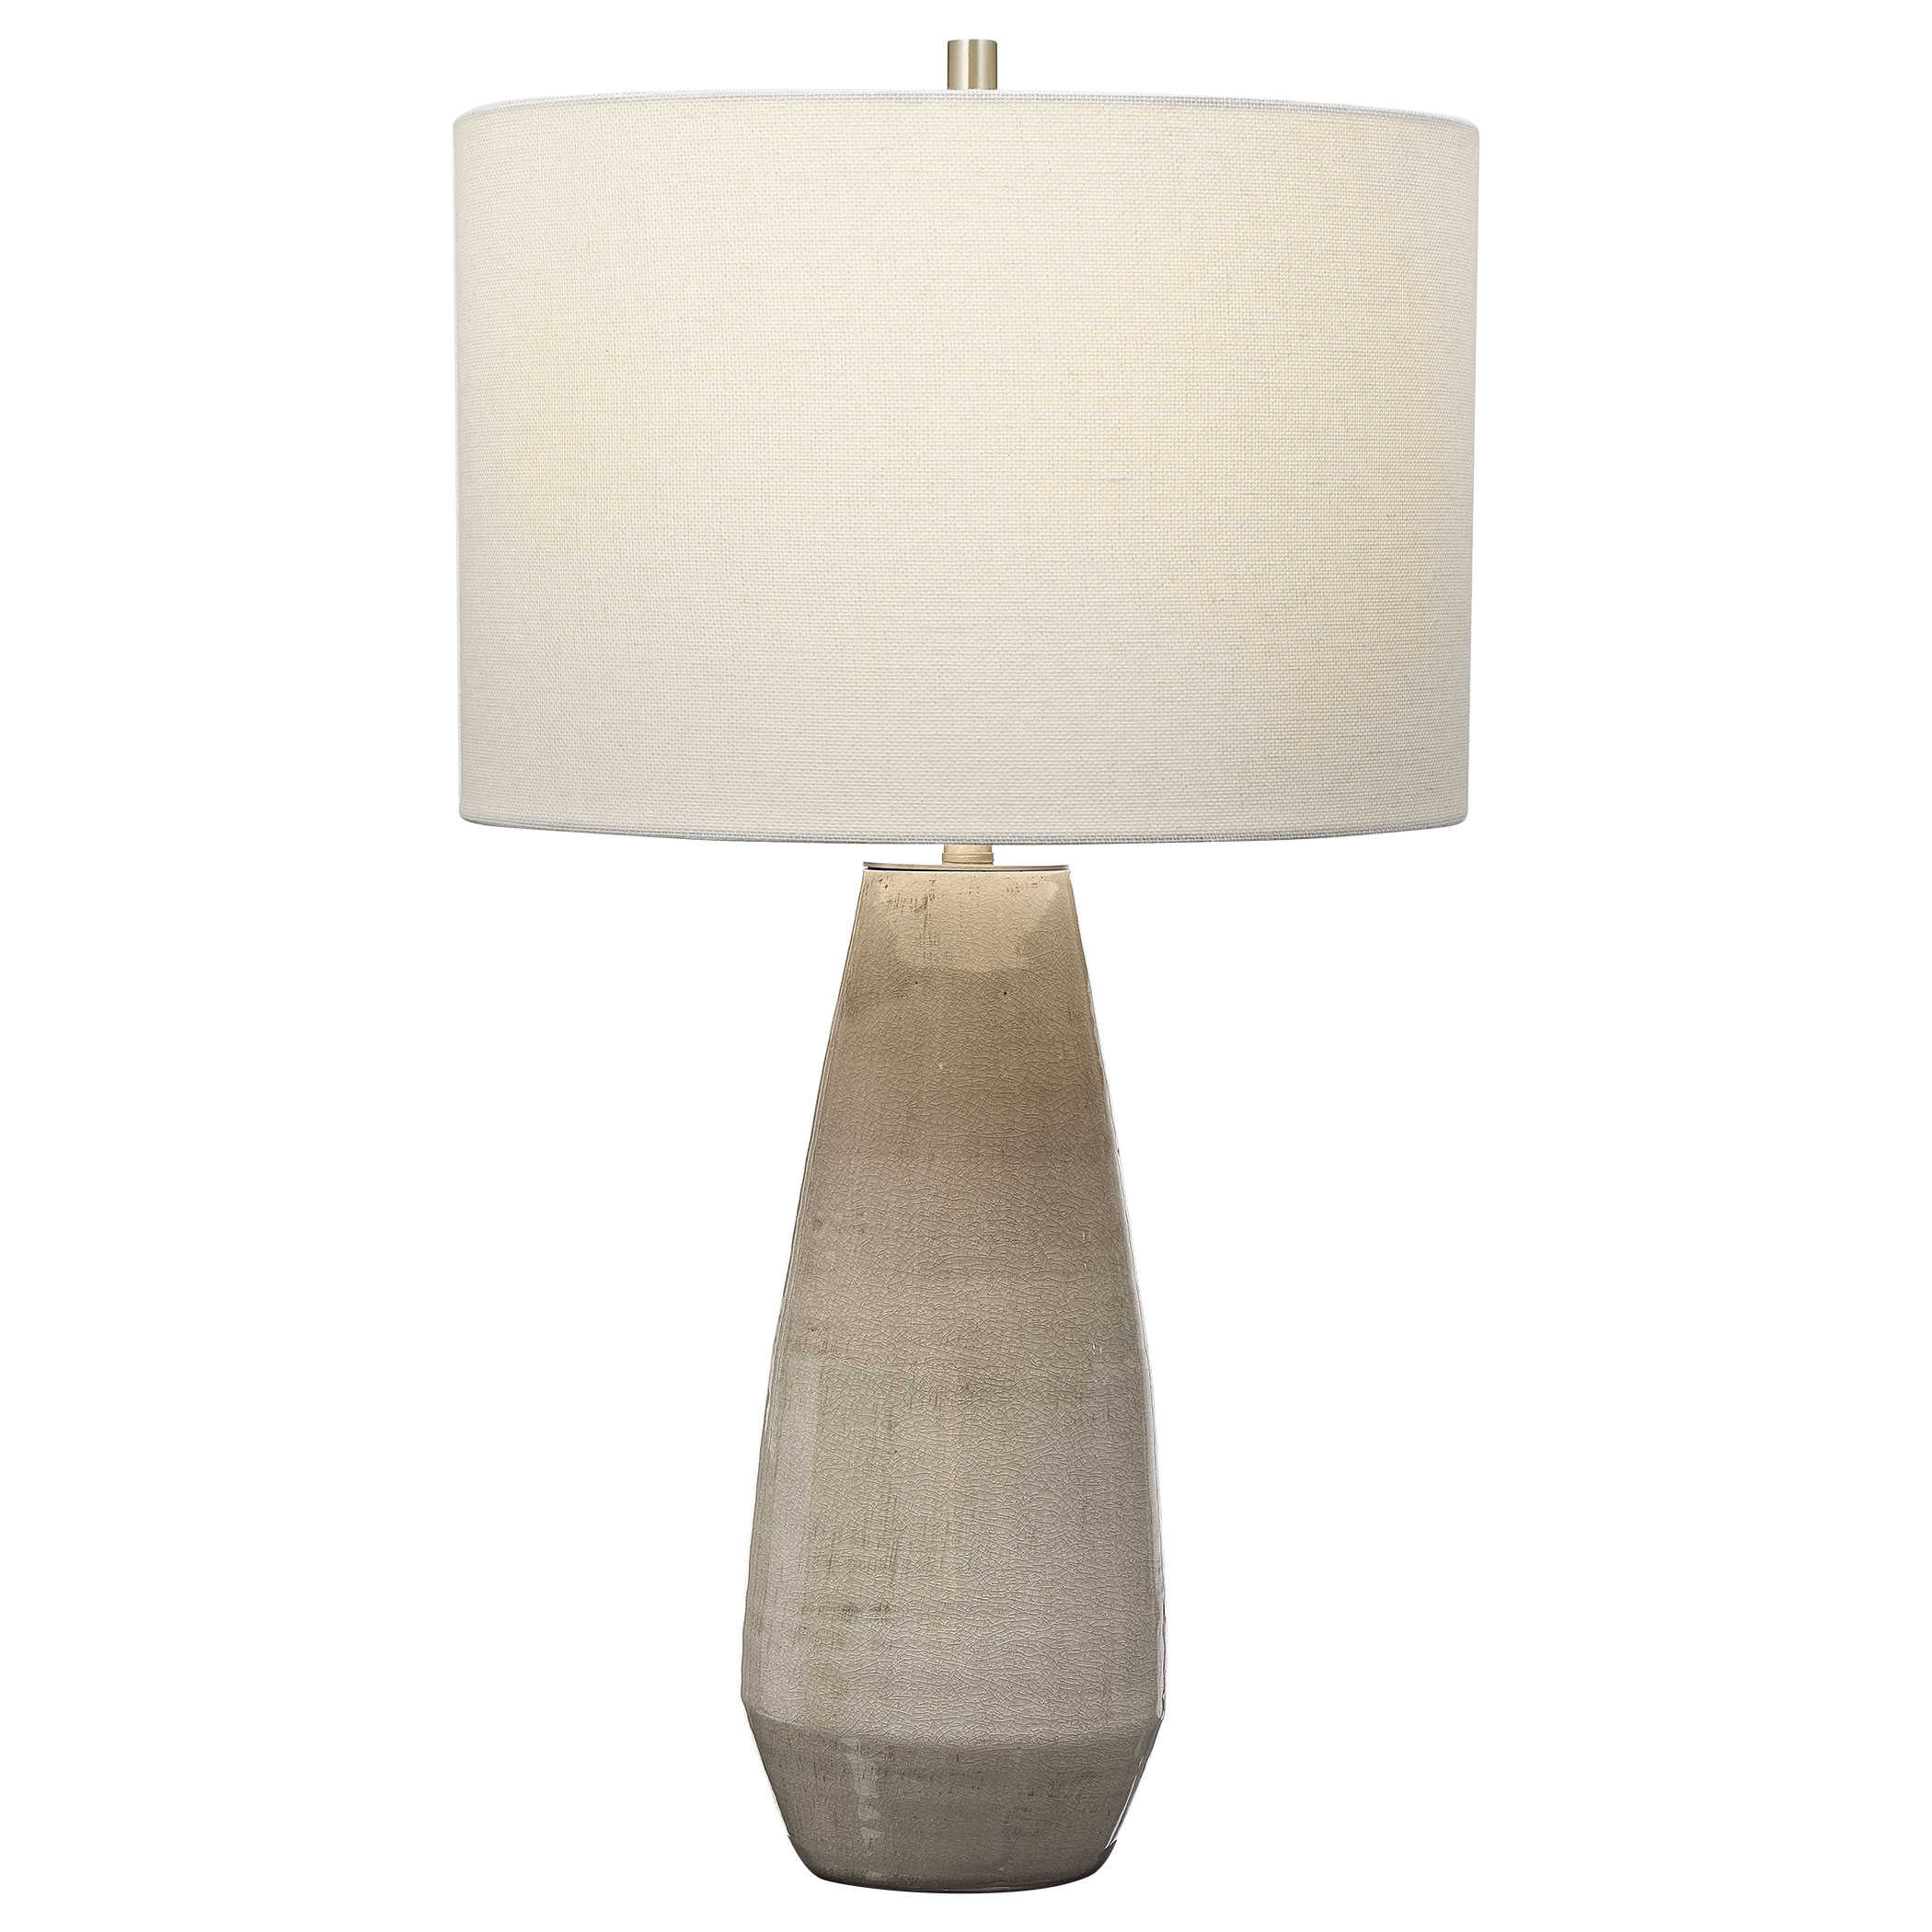 Uttermost Volterra Taupe-Gray Table Lamp Lamp Uttermost Ceramic, Steel  